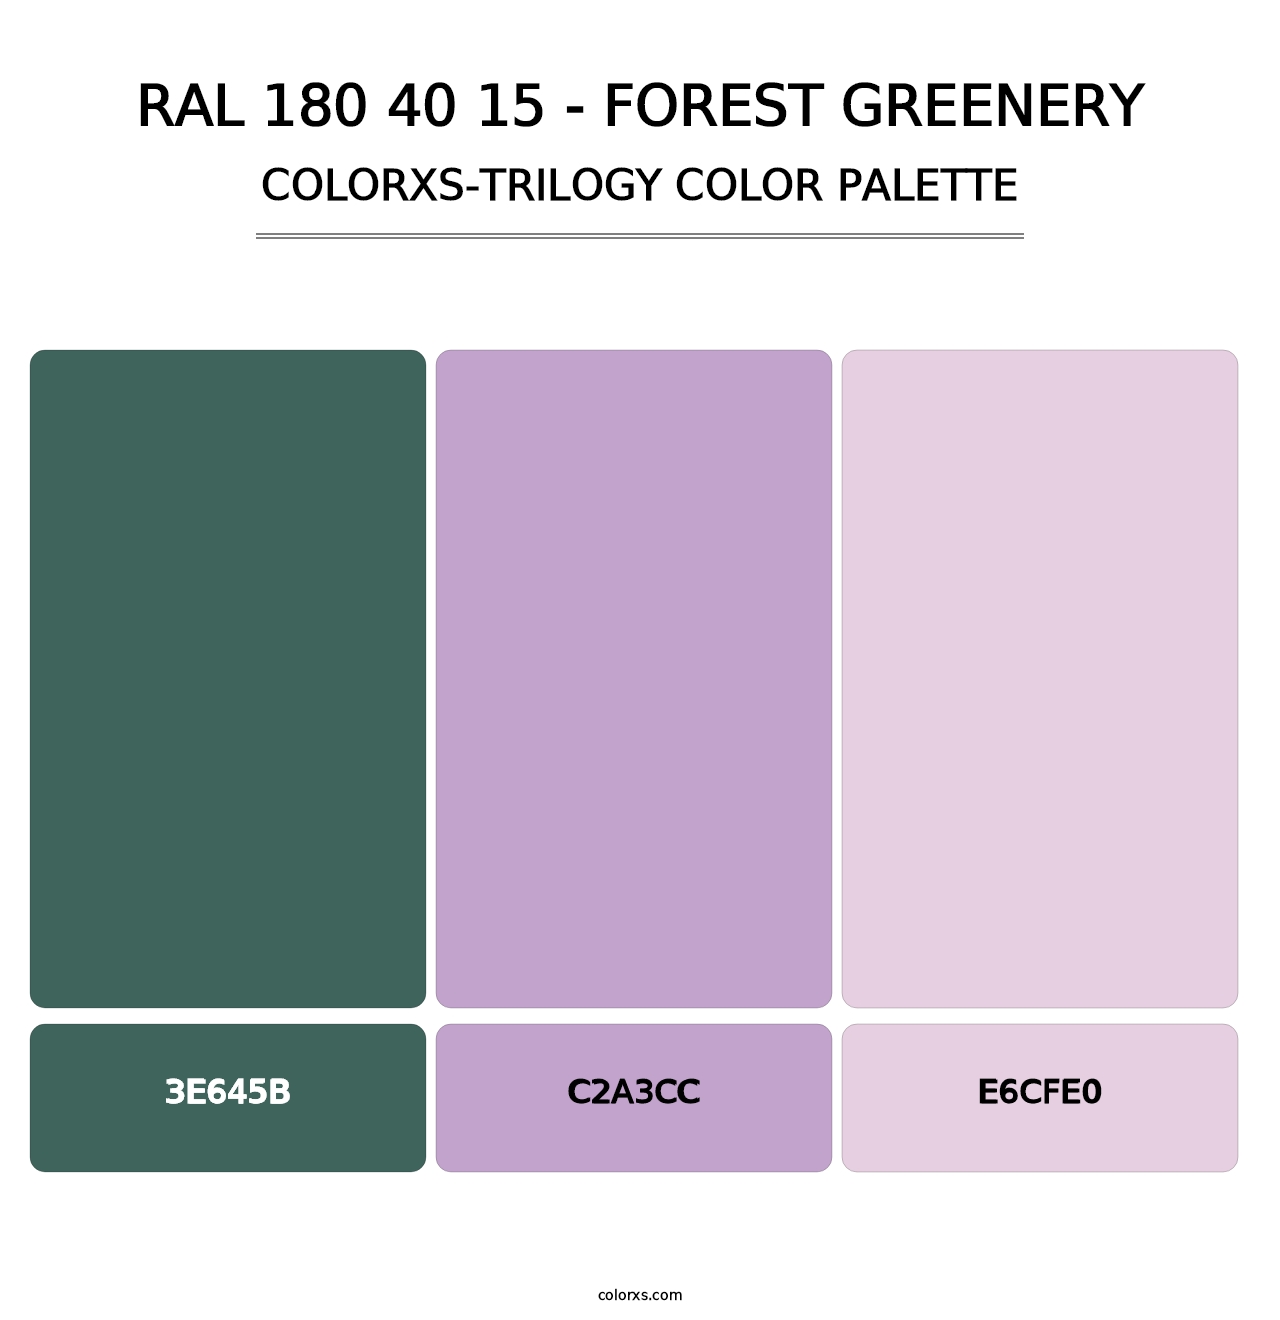 RAL 180 40 15 - Forest Greenery - Colorxs Trilogy Palette